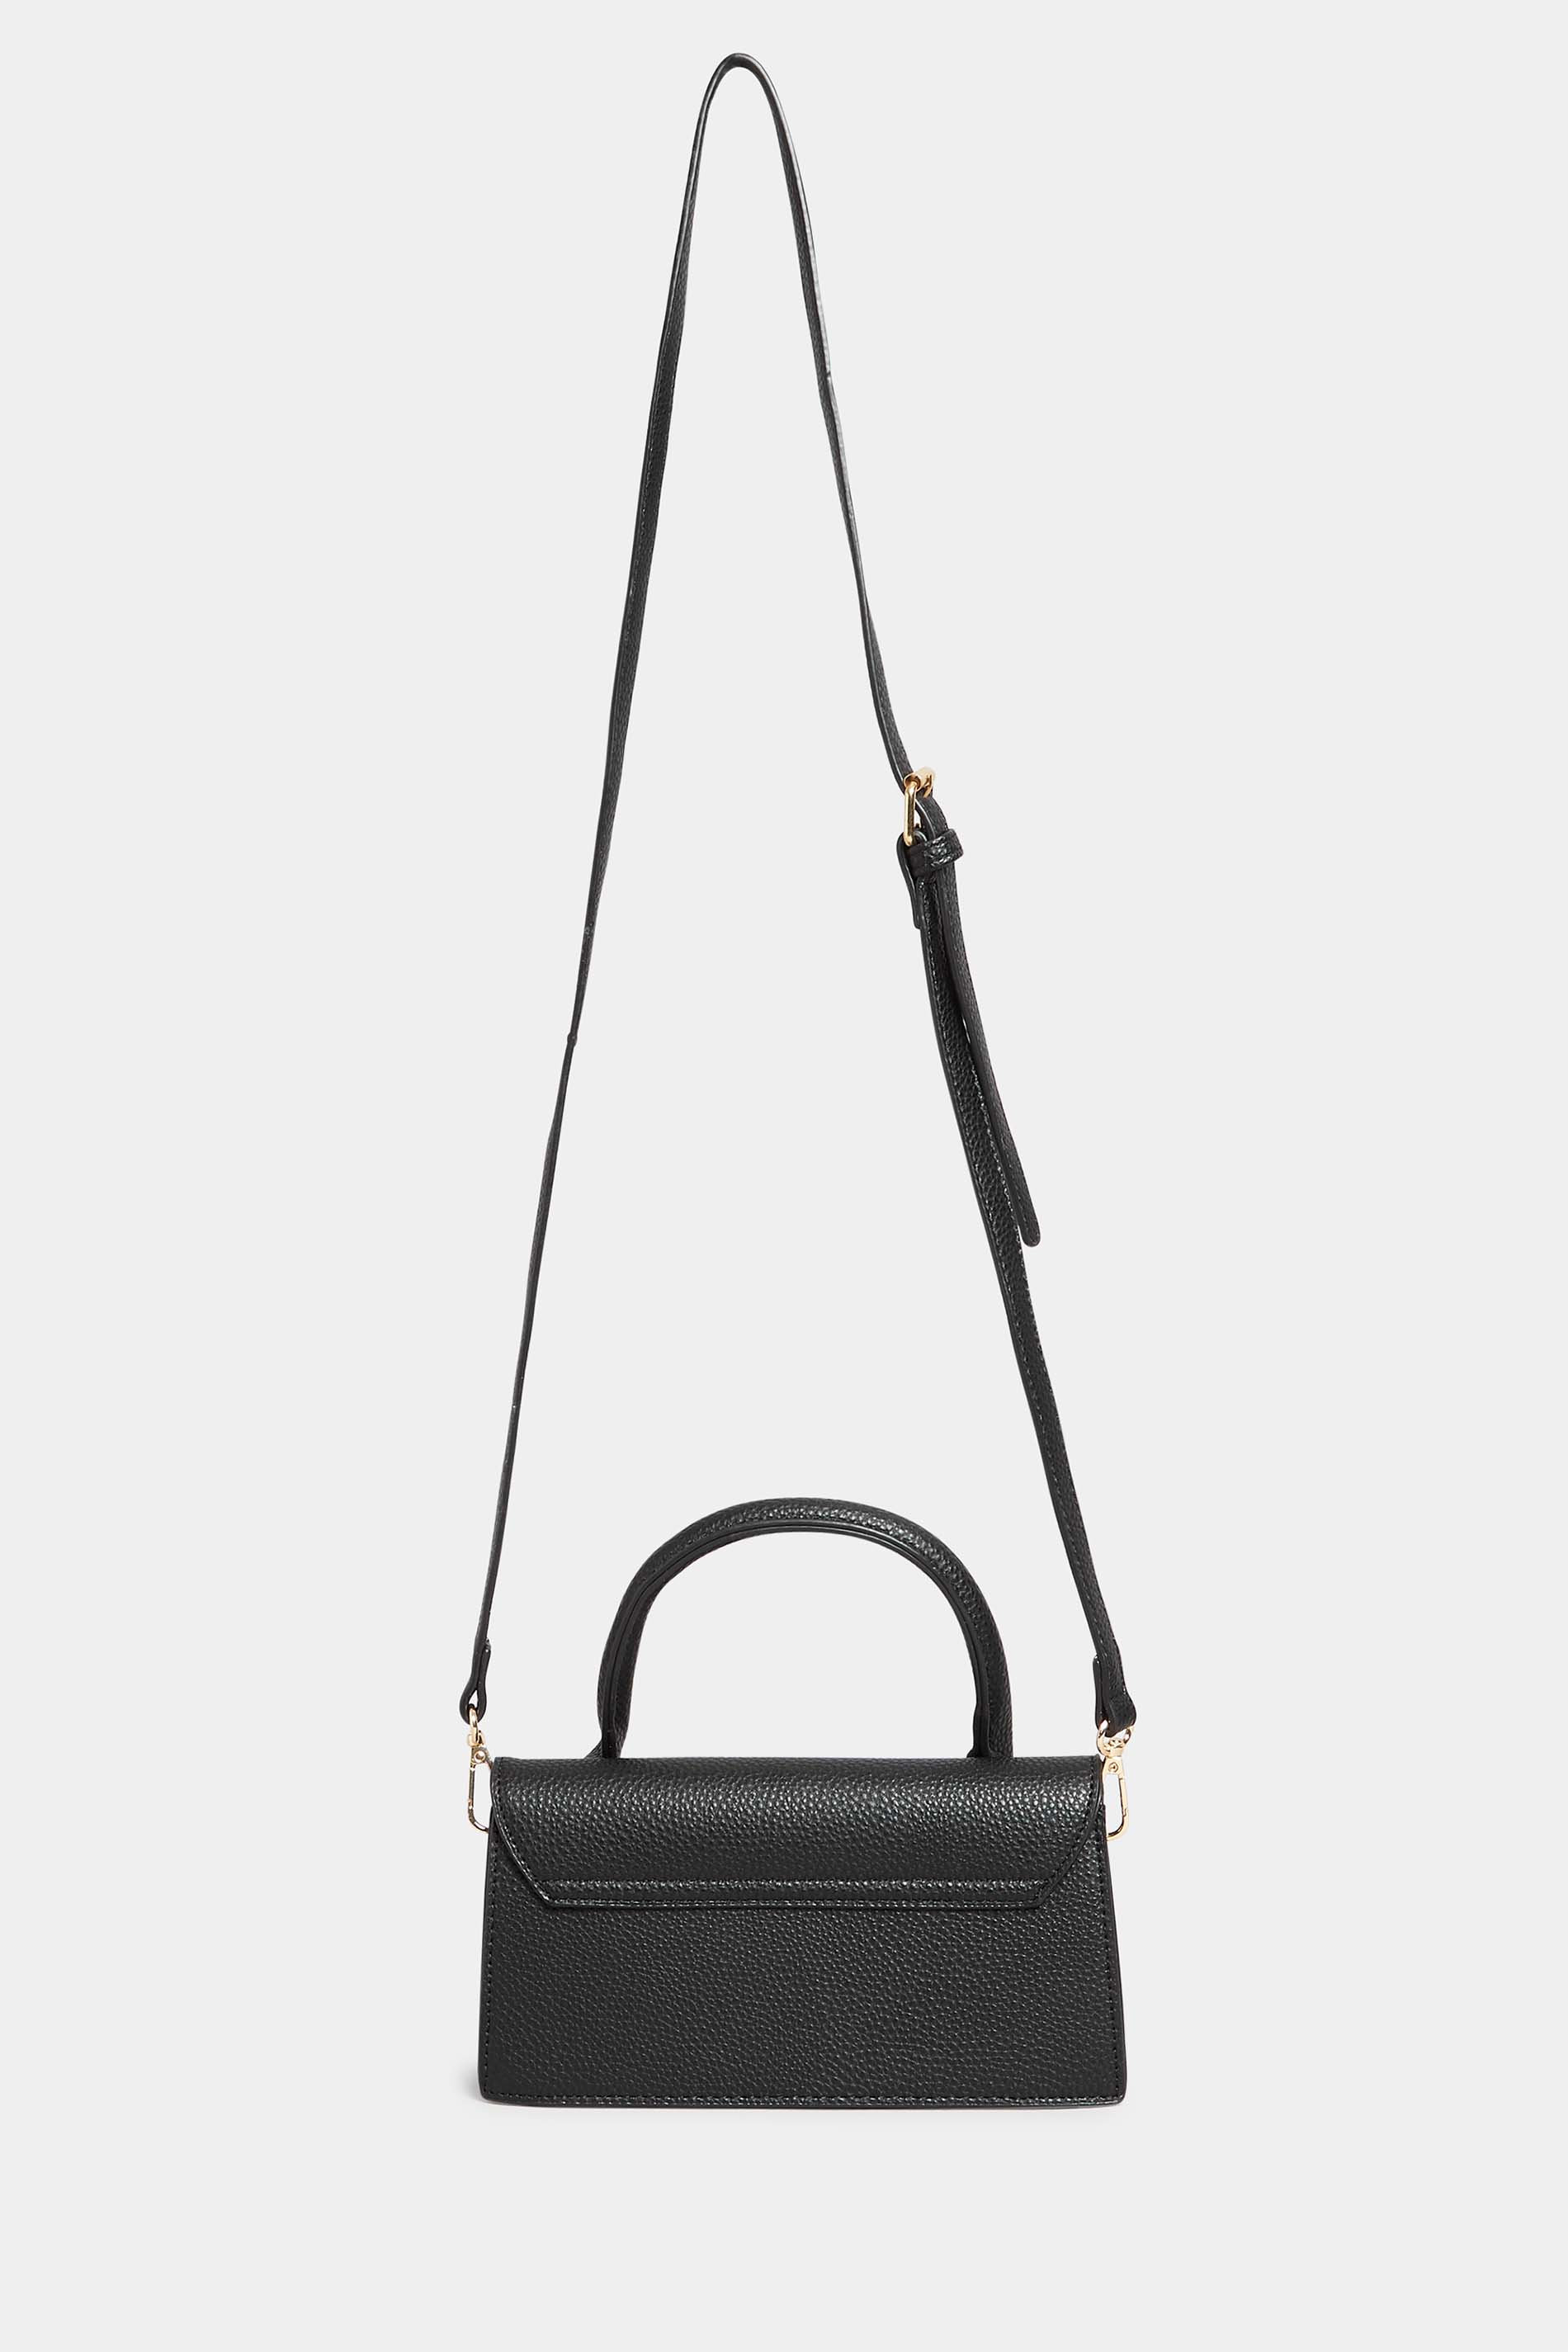 Yours Plus Size Black Top Handle Crossbody Bag Size One Size | Women's Plus Size and Curve Fashion